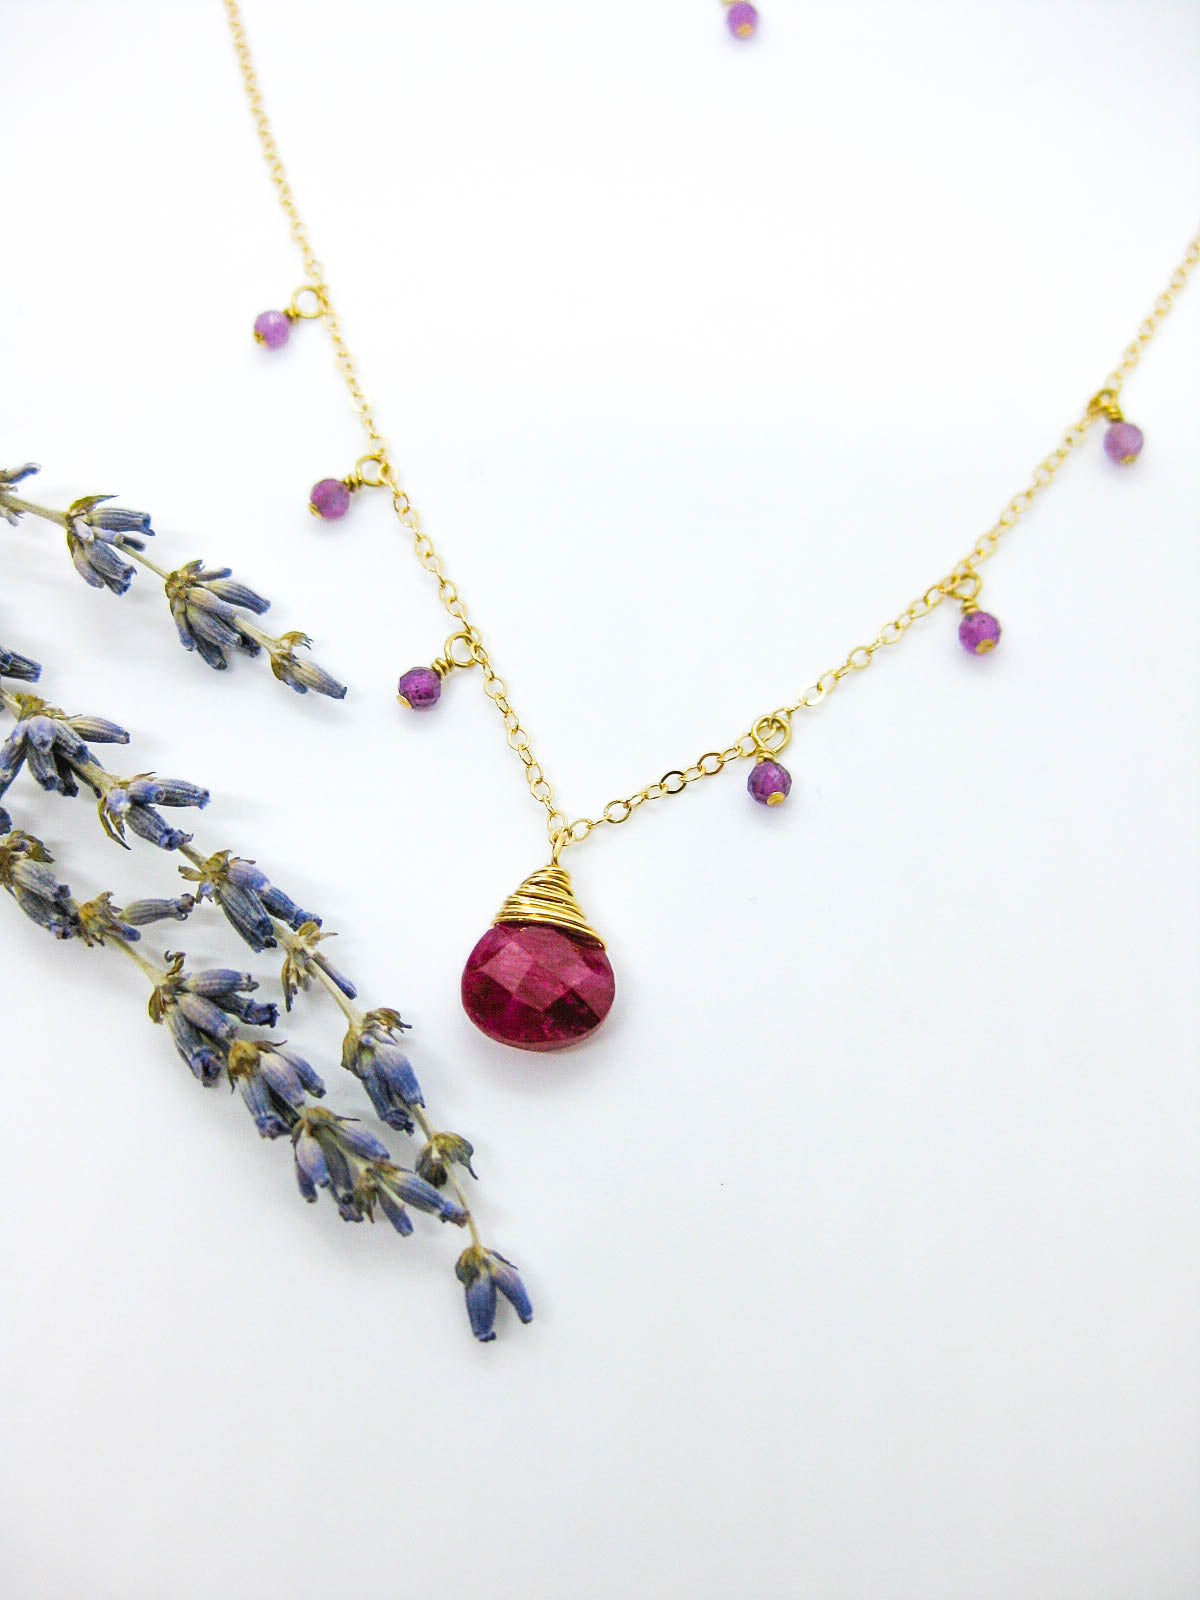 simple ruby necklace